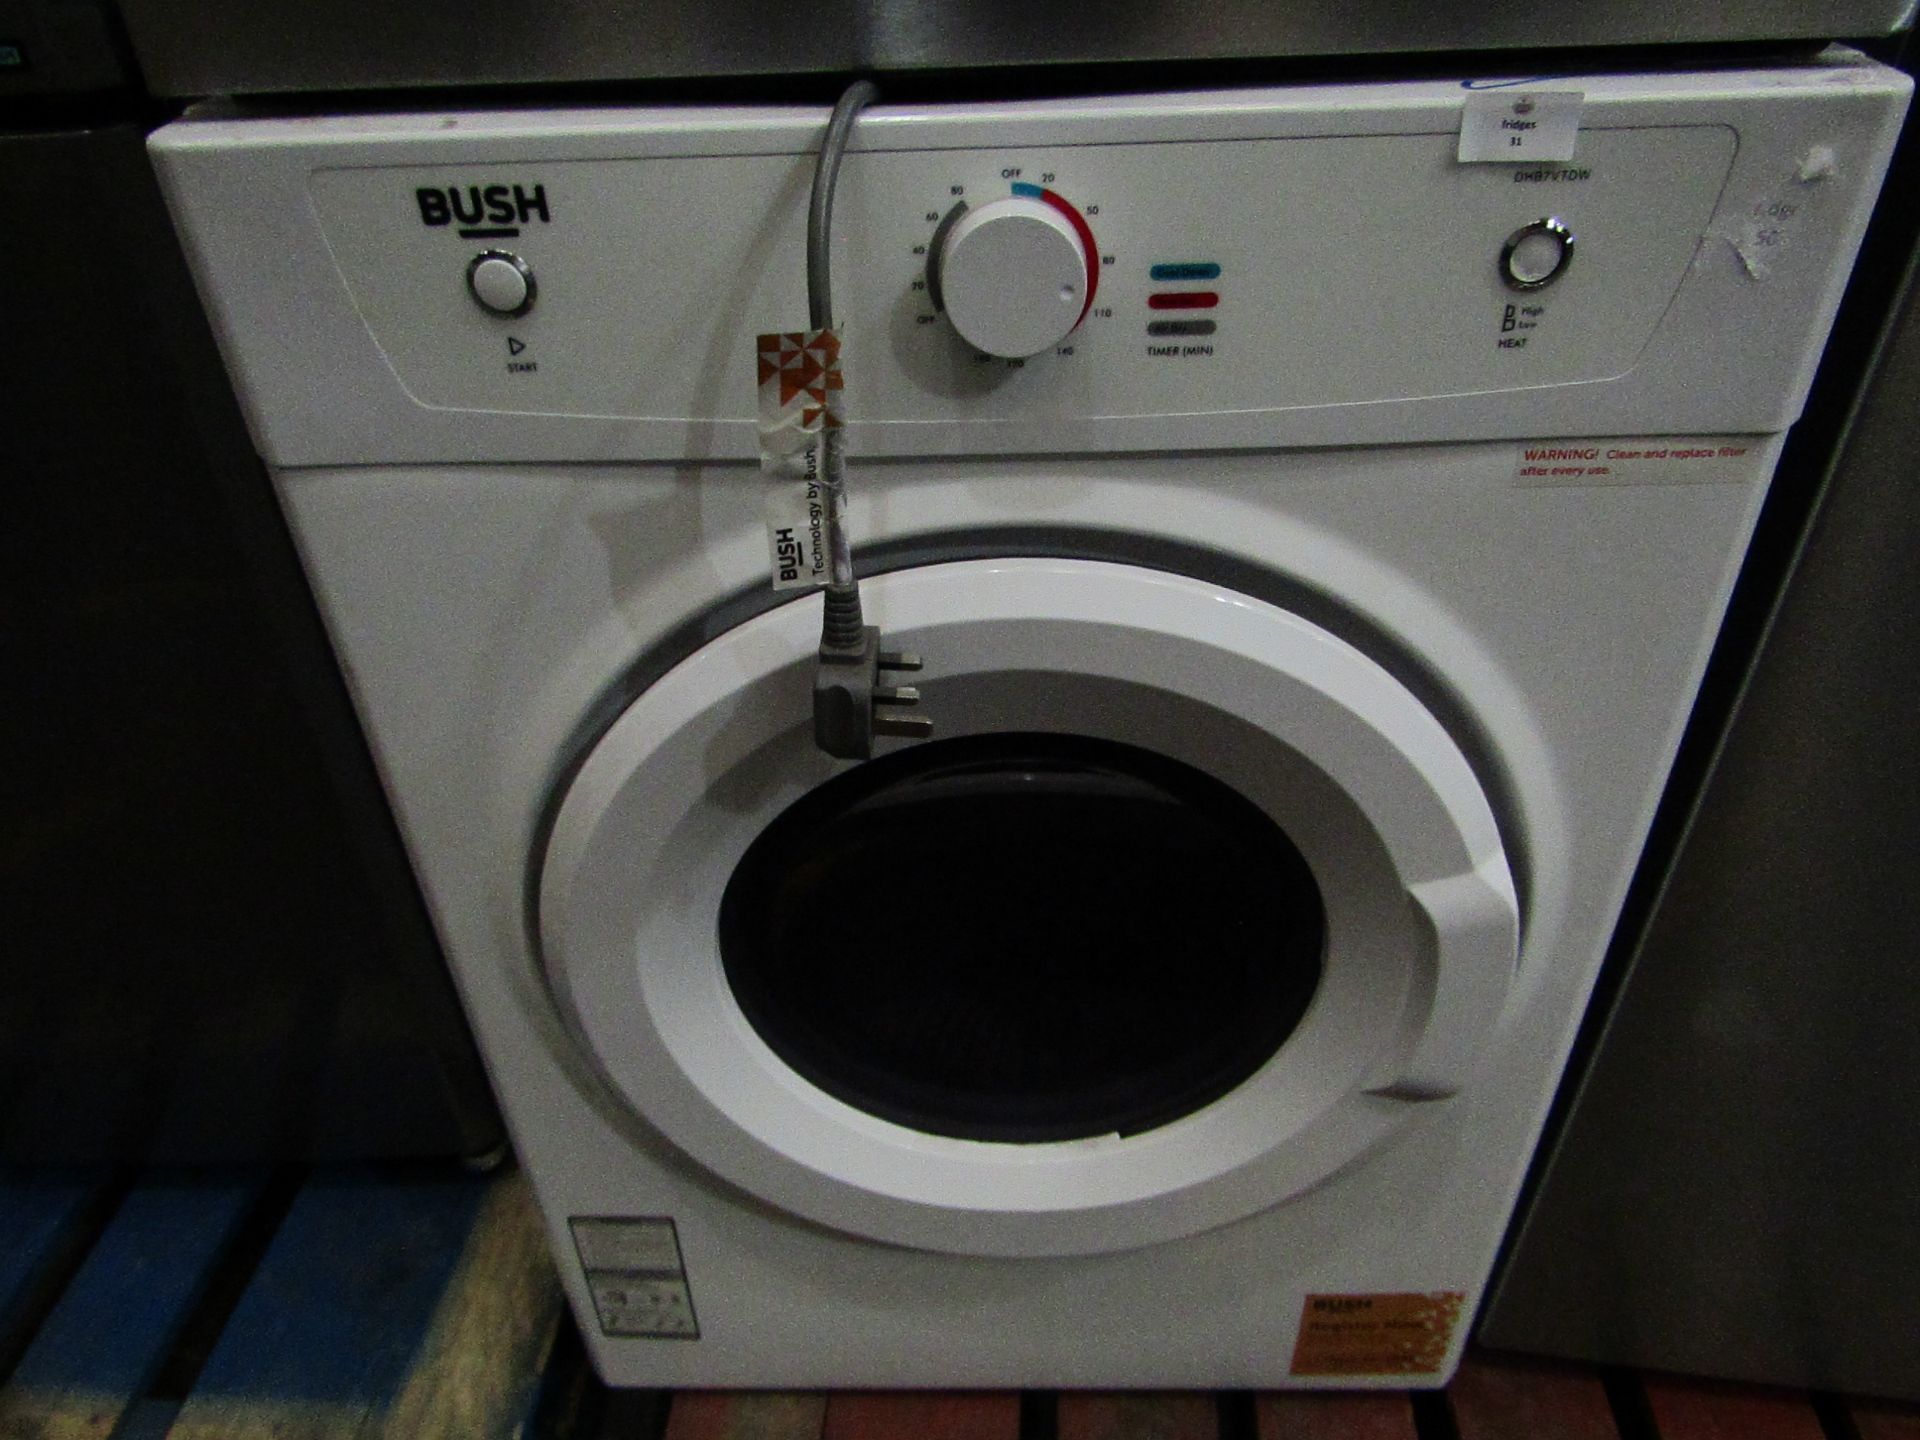 BUSH Vented Tumble Dryer DHB7VTDW RRP ??170.00 - The items in this lot are thought to be in good